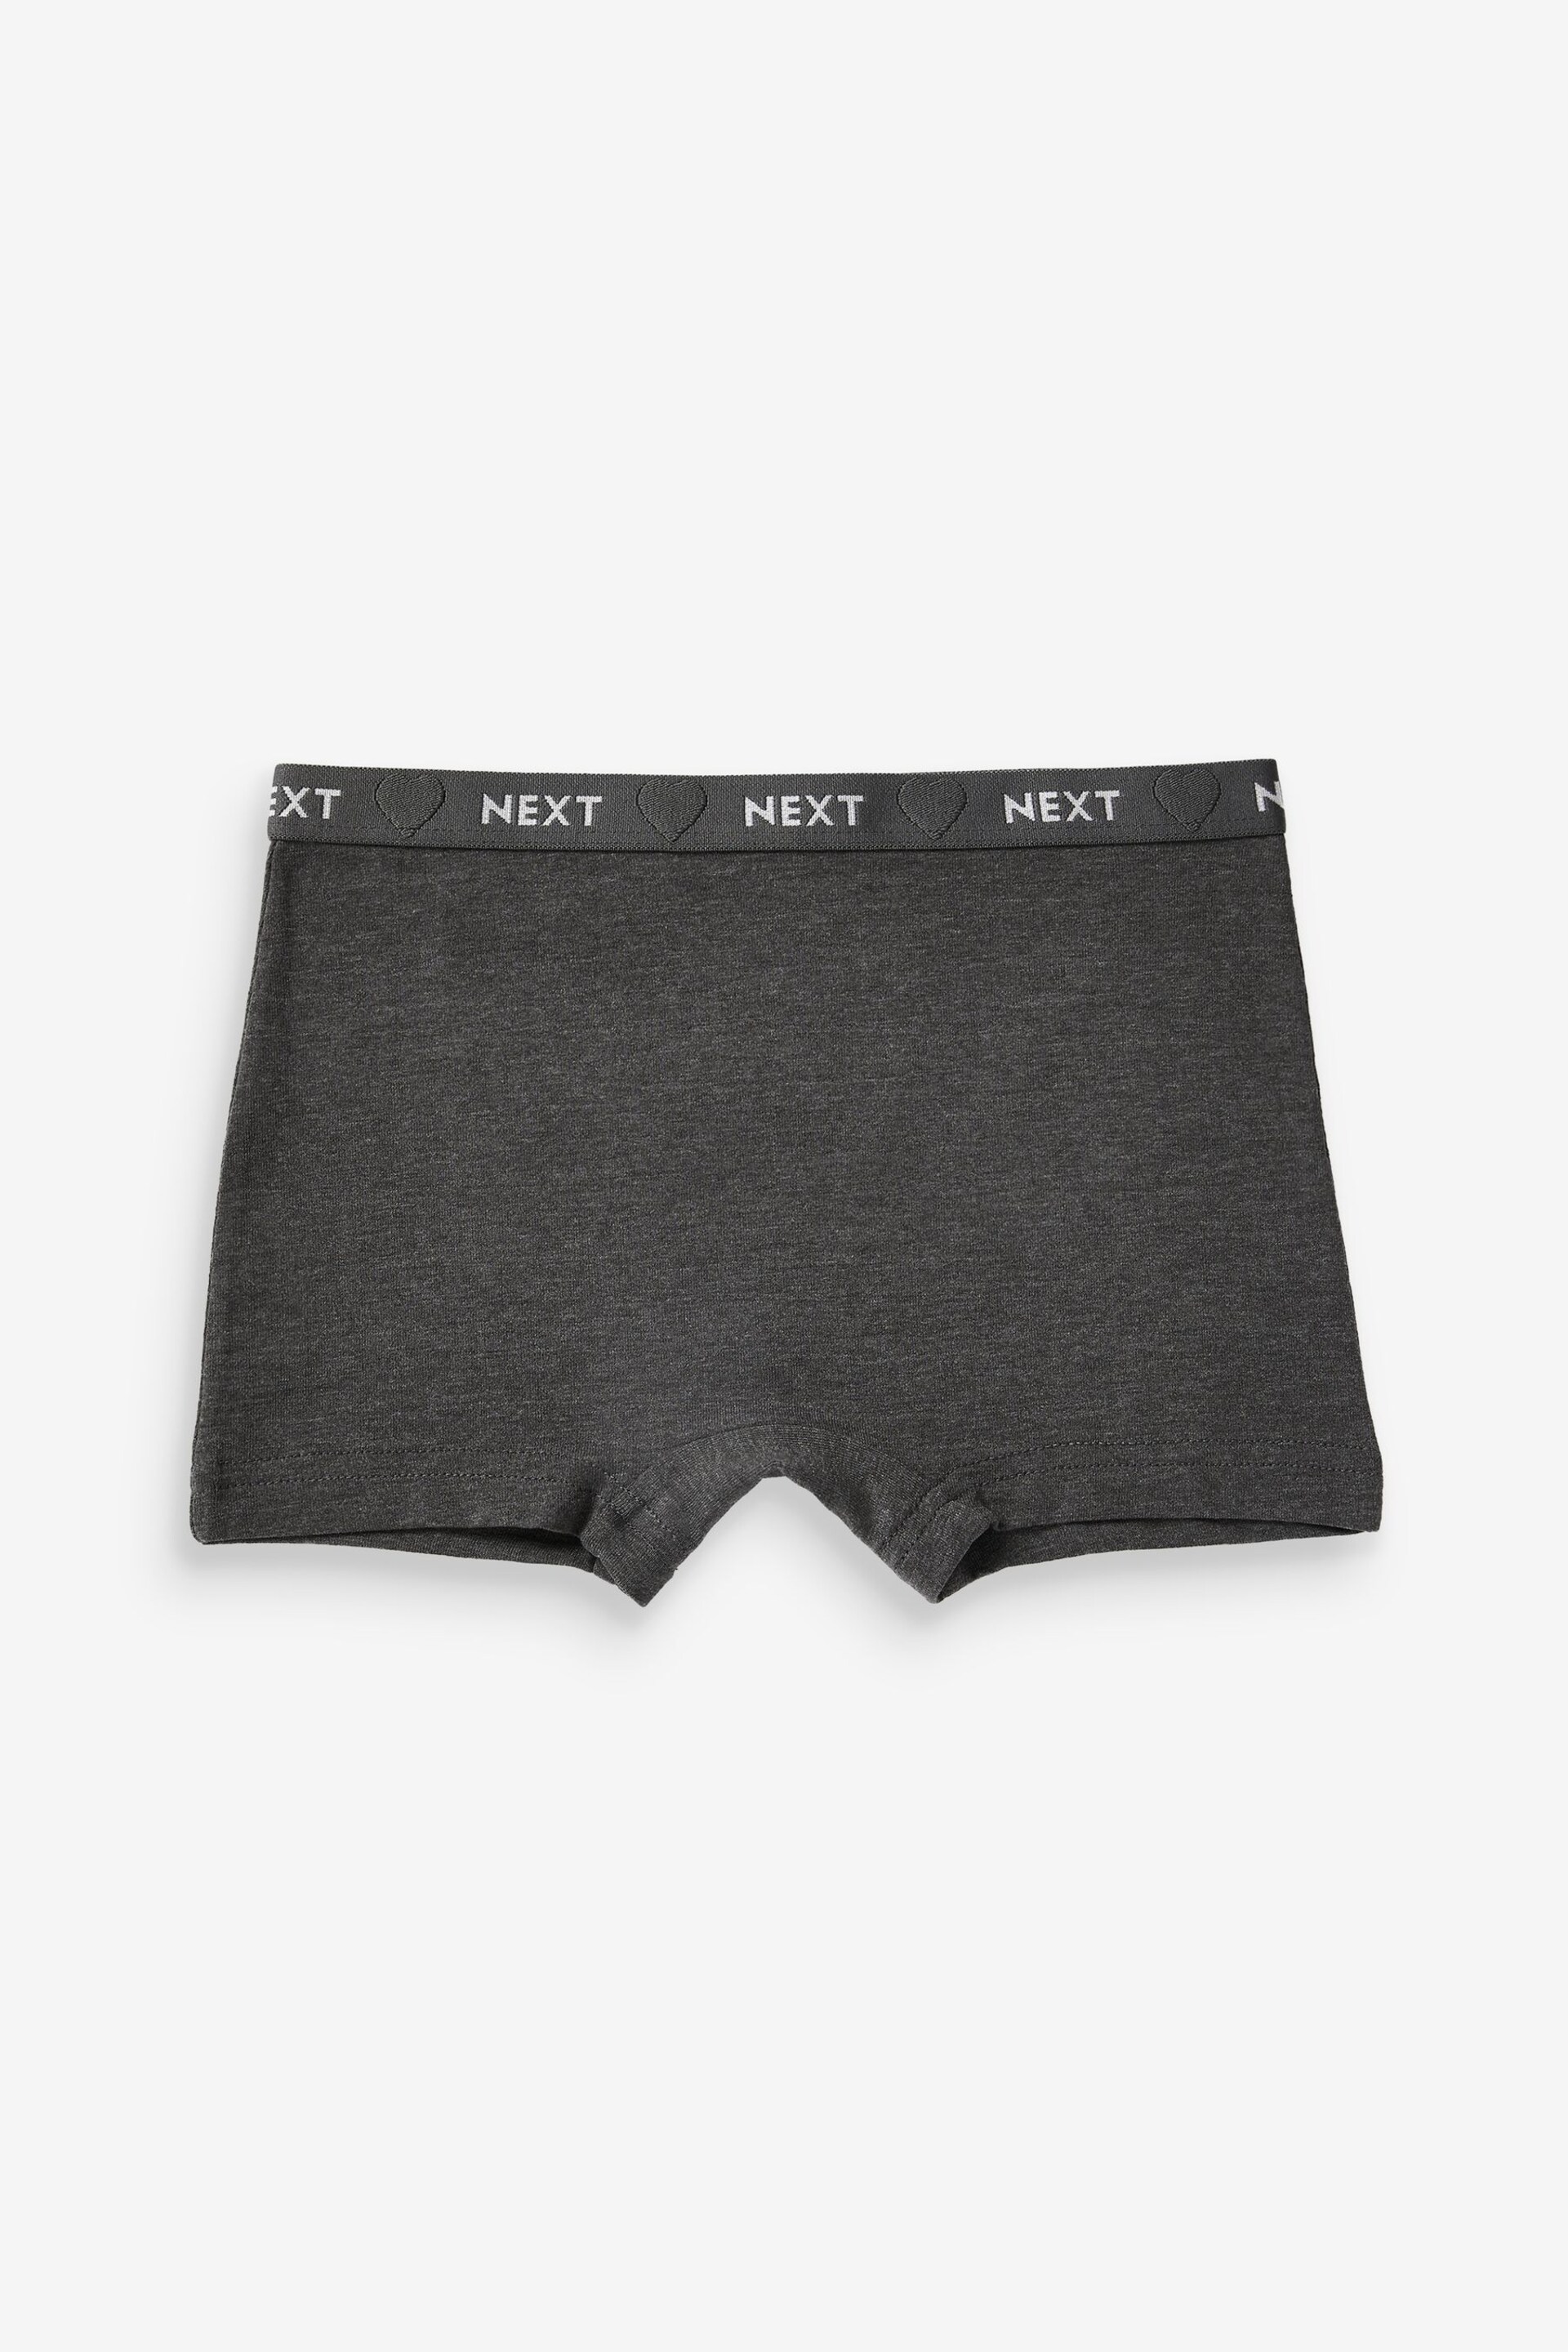 Charcoal Grey Shorts 5 Pack (2-16yrs) - Image 2 of 4